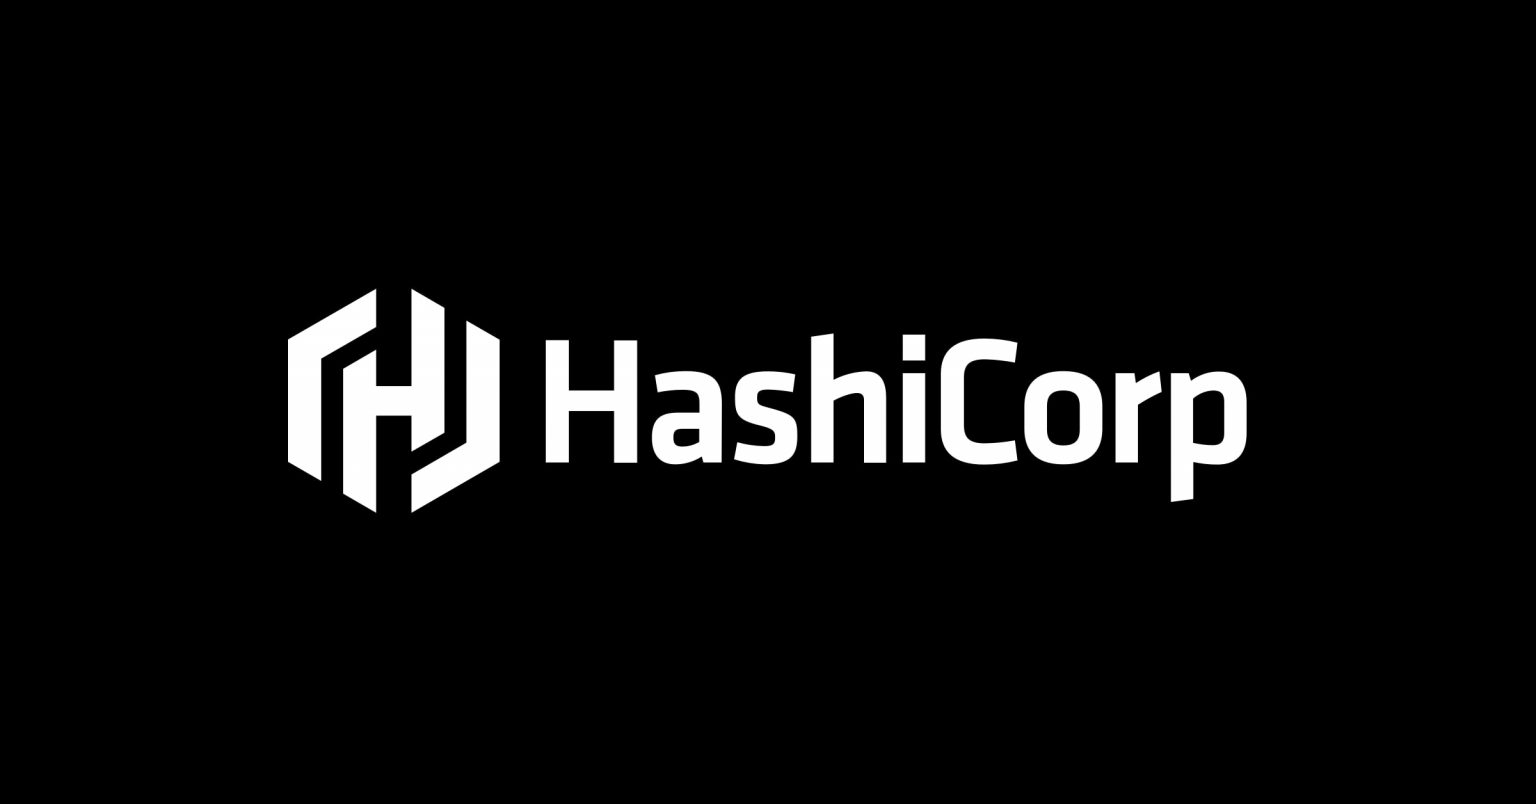 HashiCorp, which helps companies manage cloud infrastructure, files for a US IPO; source say it could seek to raise $1B+ and is aiming for a $10B+ valuation (Bloomberg)